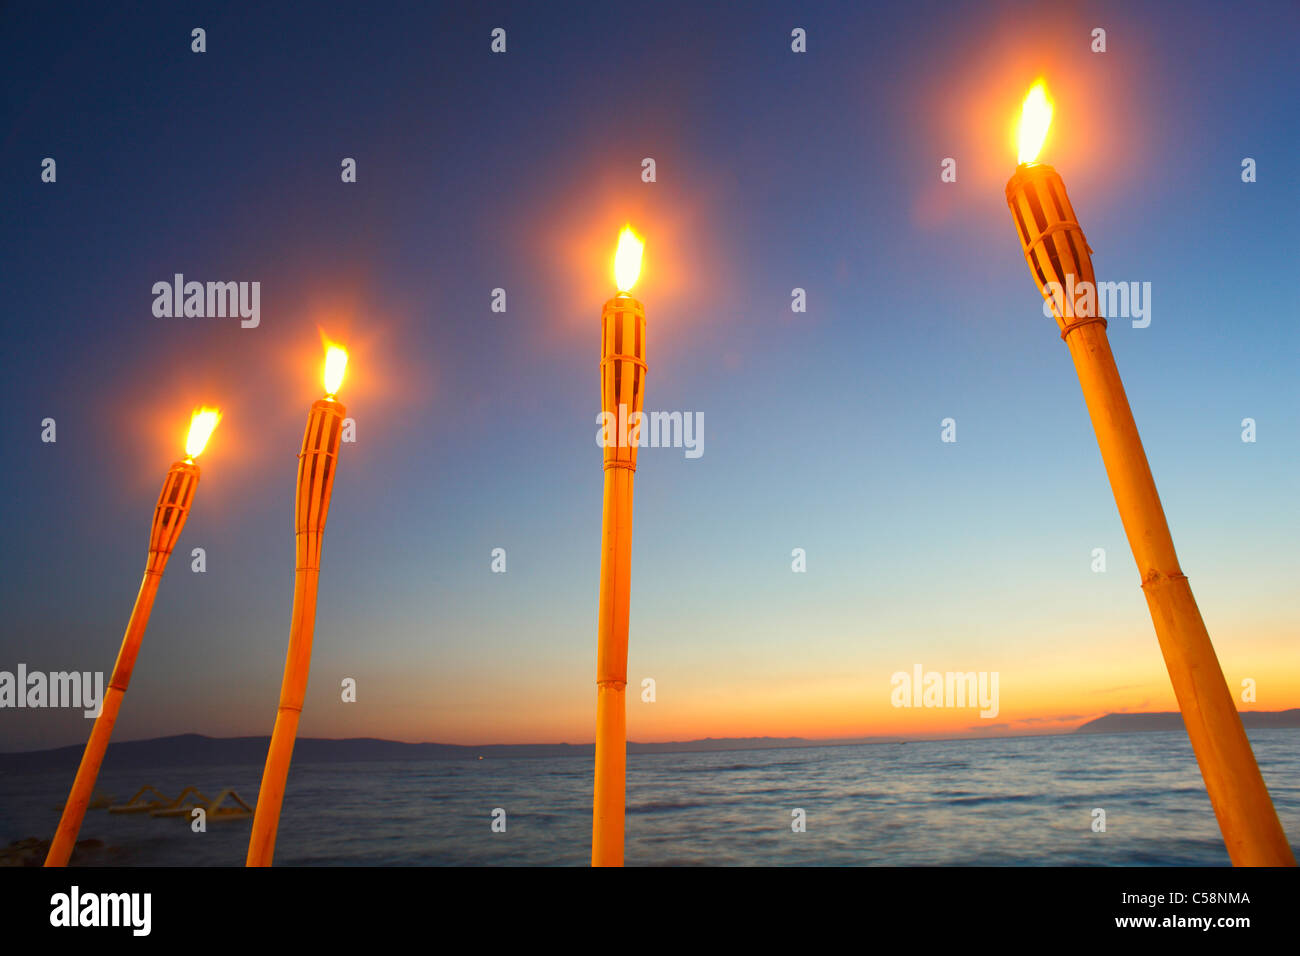 Four fire torches at sunset Stock Photo